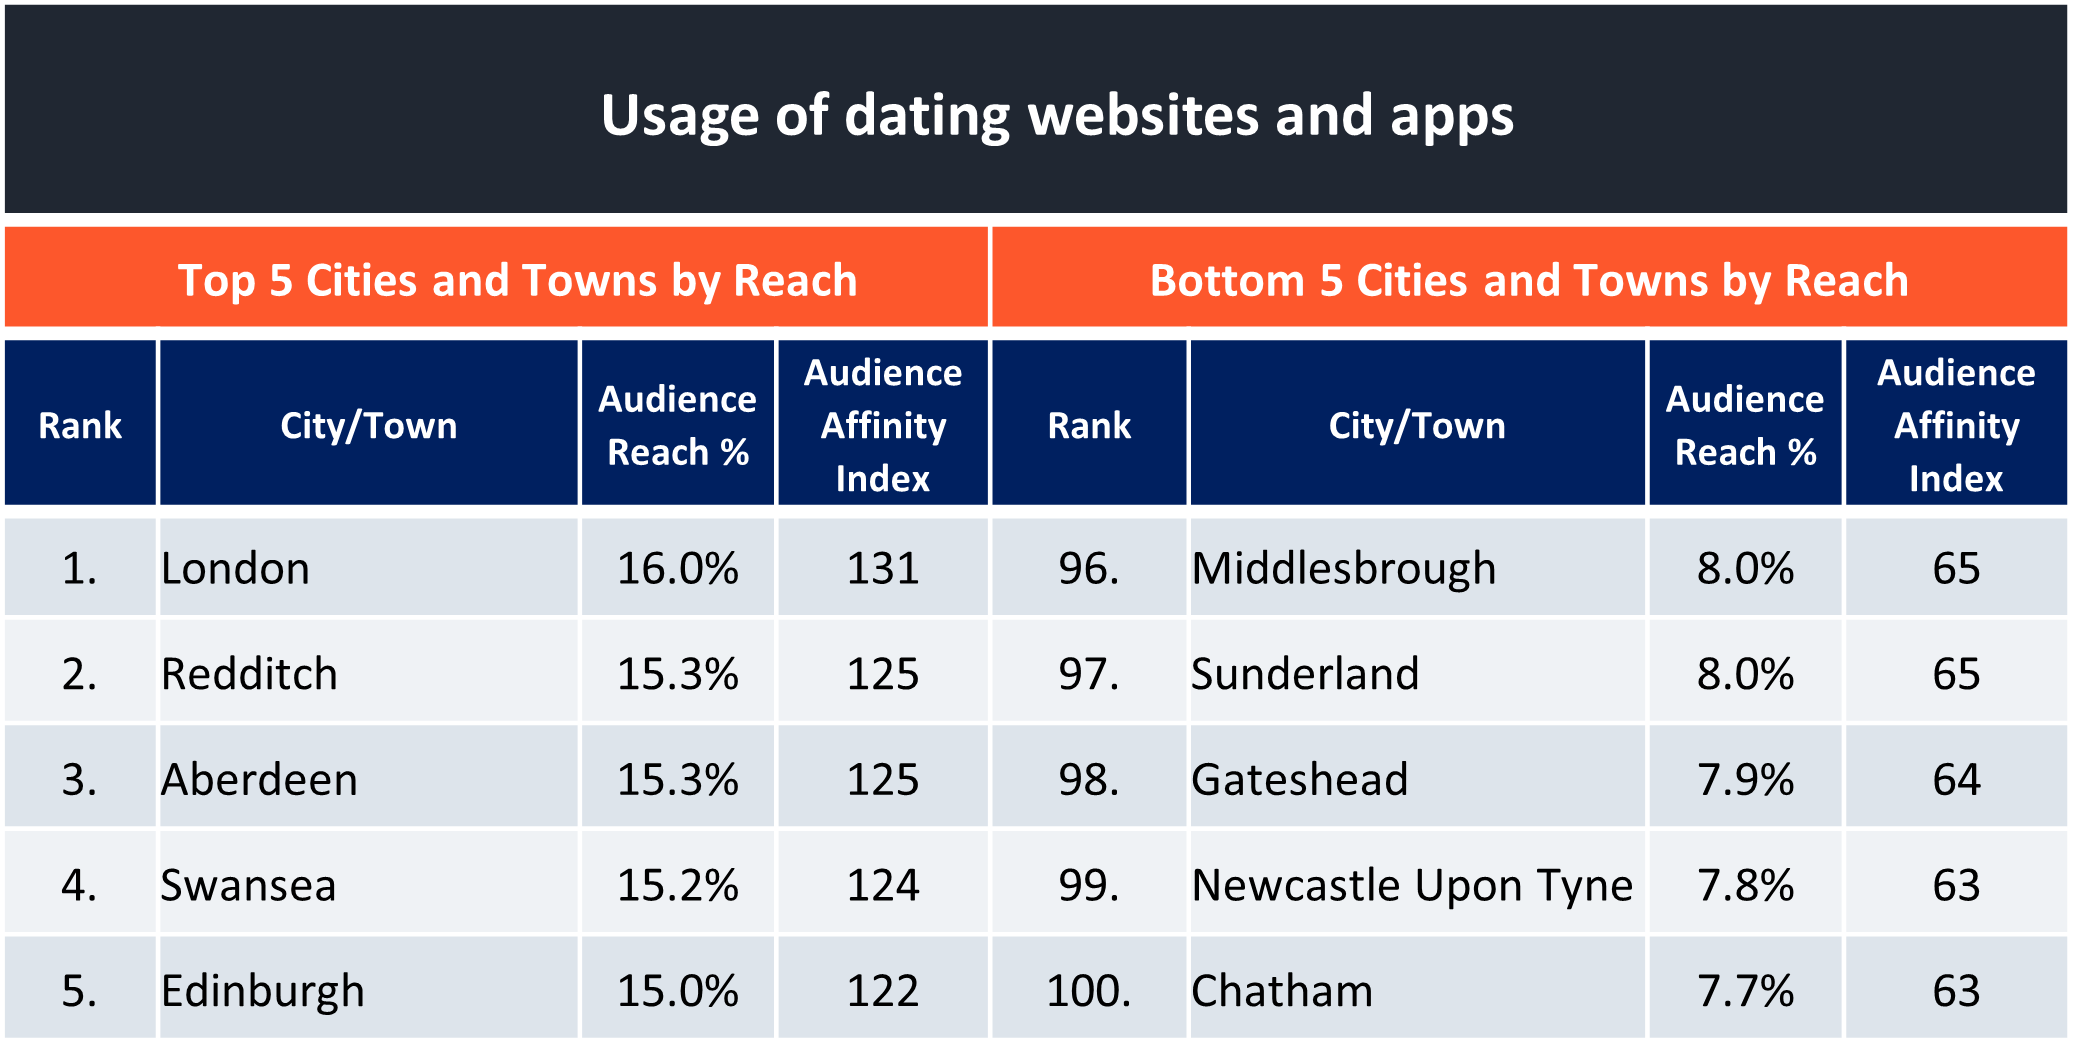 Usage of dating websites and apps